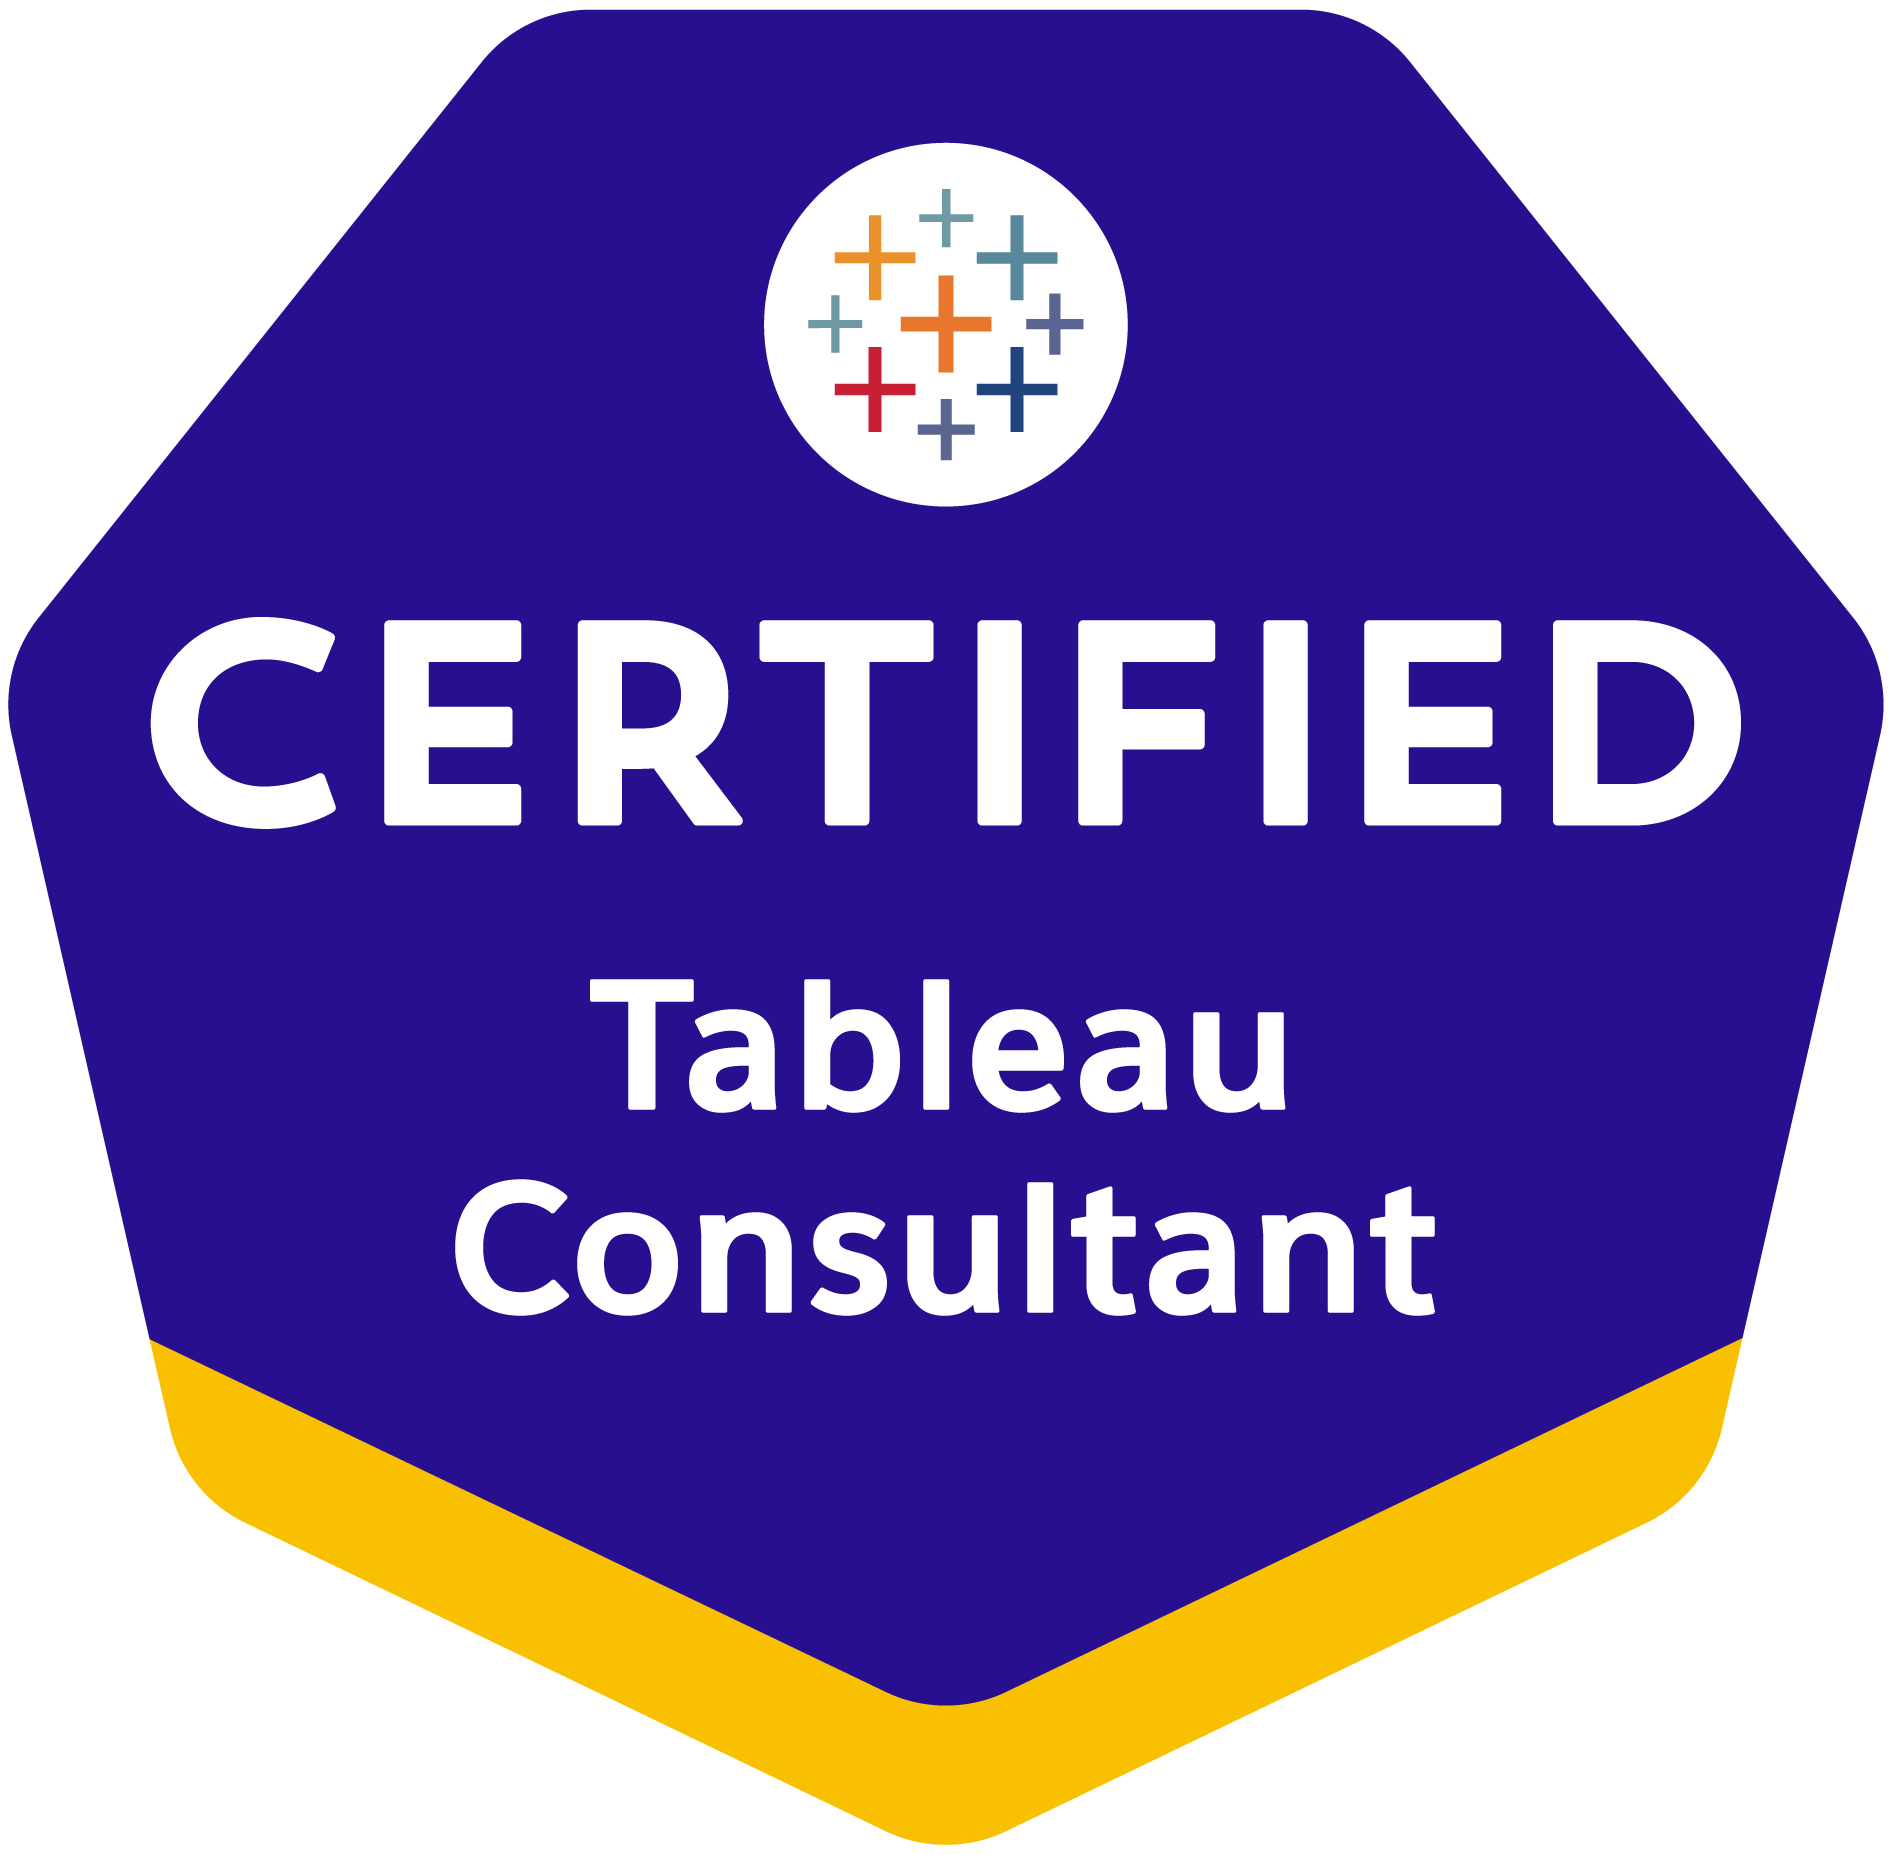 Navigate to Tableau Certified Consultant